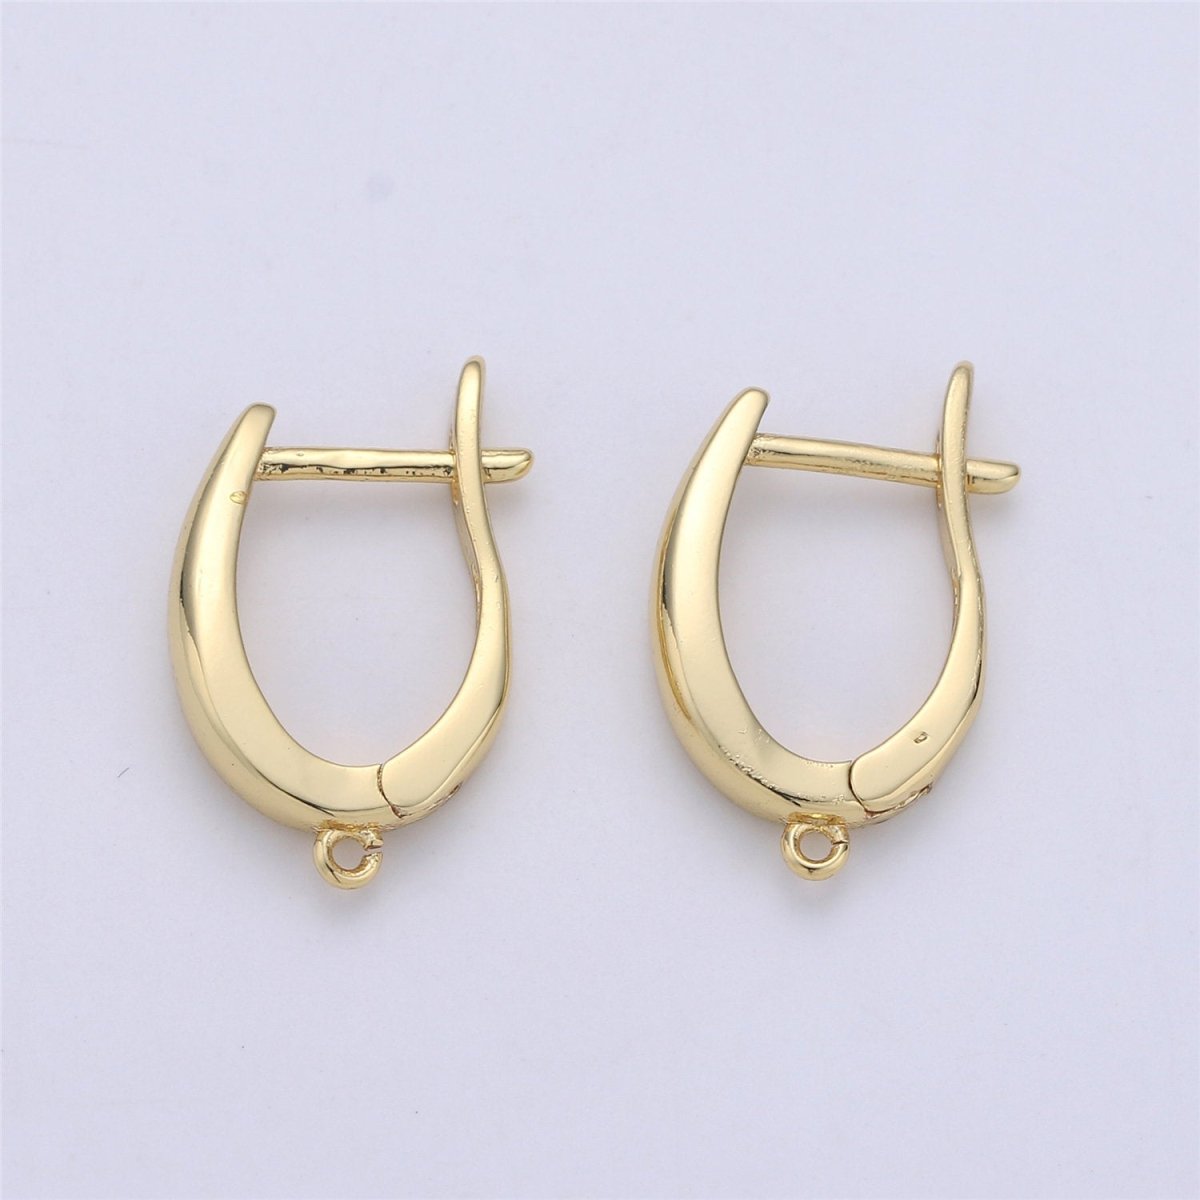 19x13mm 1 pair Gold Huggie Earring one touch w/ open link 14K gold Filled Earring Nickel and Lead free, Lever back earring making Supply K-681 K-683 - DLUXCA